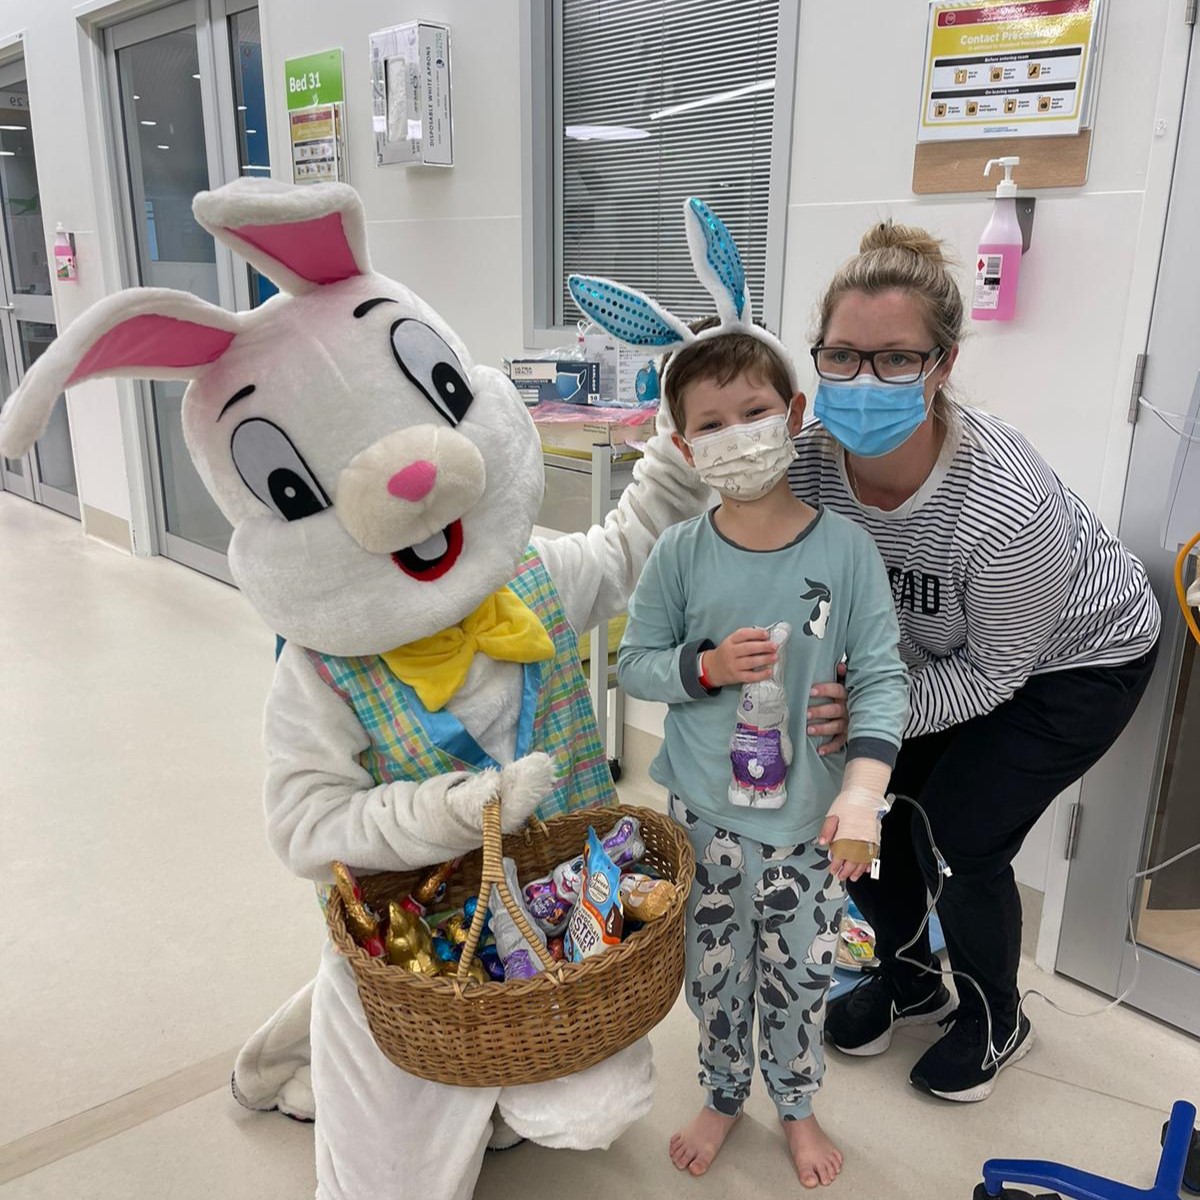 We welcomed a very special visitor today at Monash Children's Hospital 🐰 Children, their families, and our wonderful team members got into the Easter spirit with a visit from the Easter Bunny who hopped from room to room delivering delicious chocolate eggs. Happy Easter!